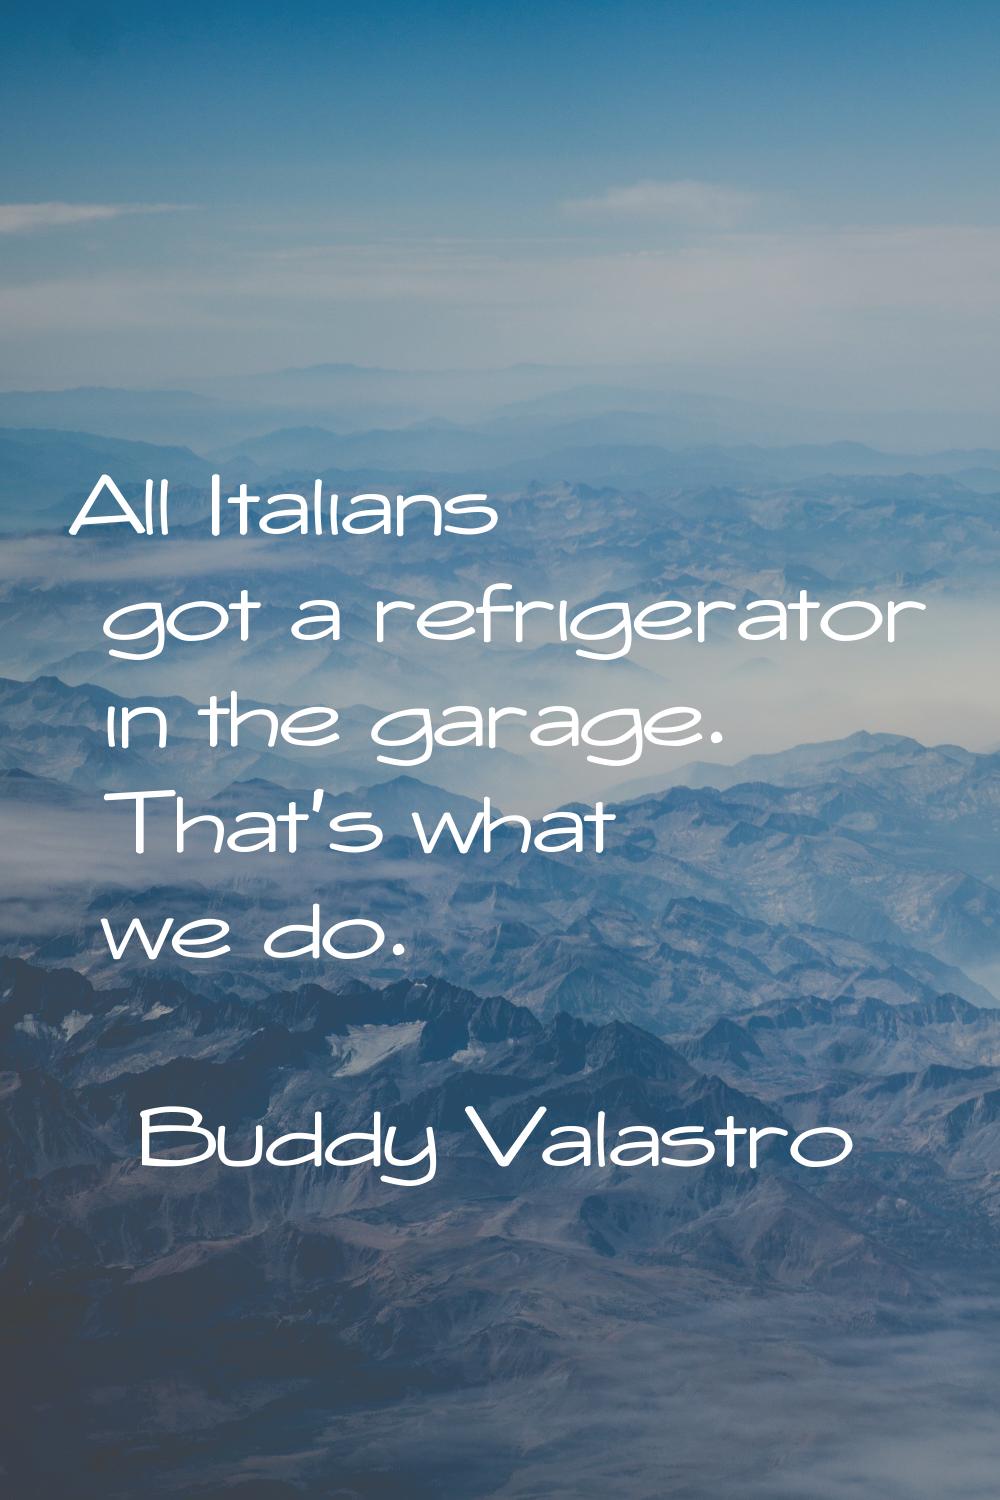 All Italians got a refrigerator in the garage. That's what we do.